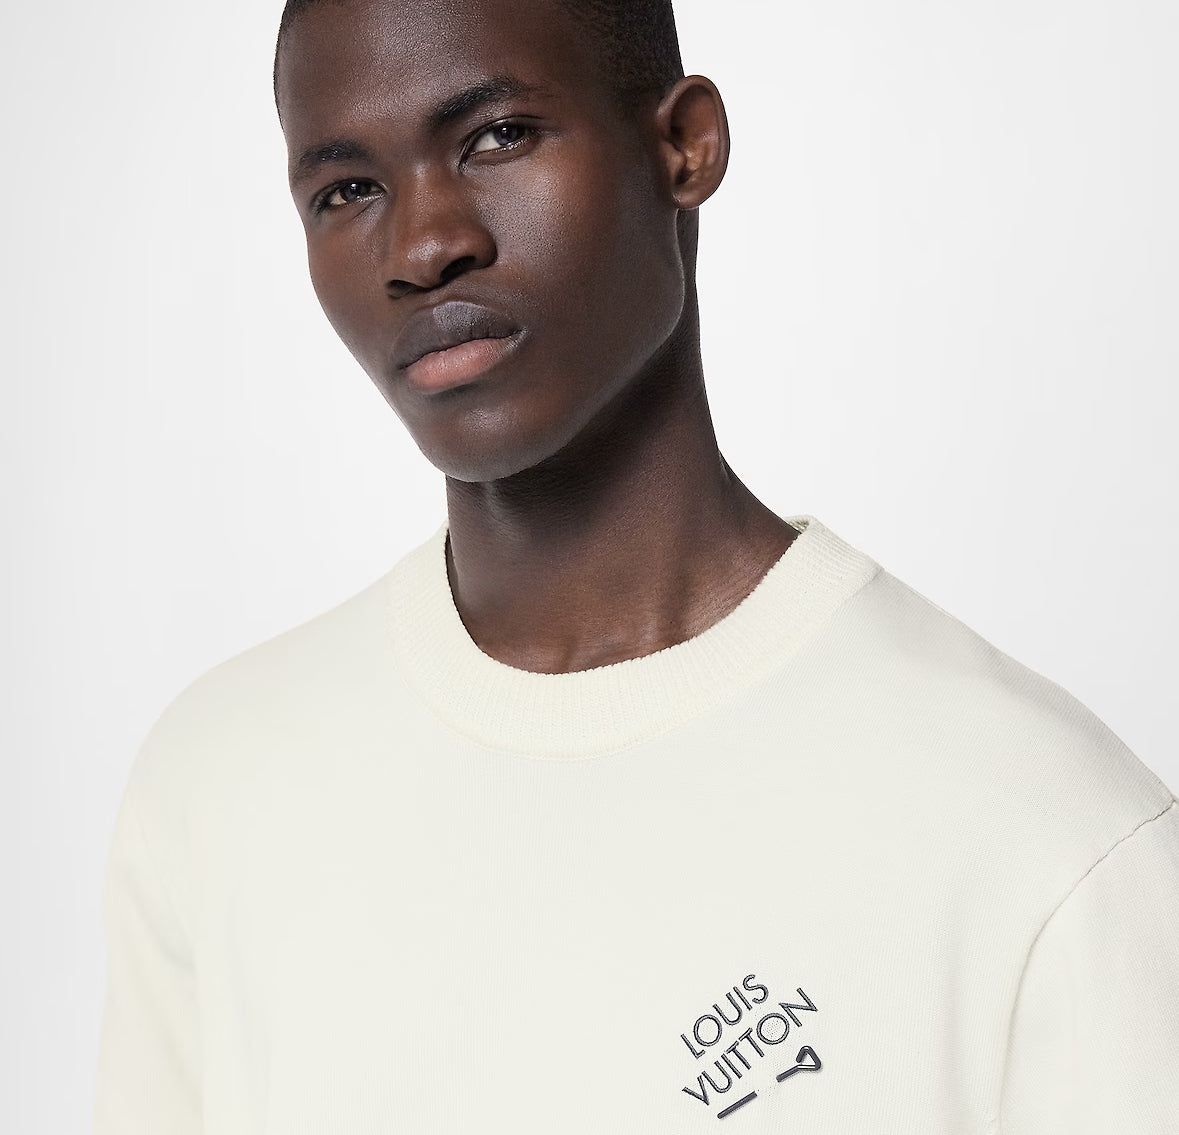 Tyler, The Creator x Louis Vuitton Embroidered Signature Short-Sleeved Cotton T-Shirt “White”